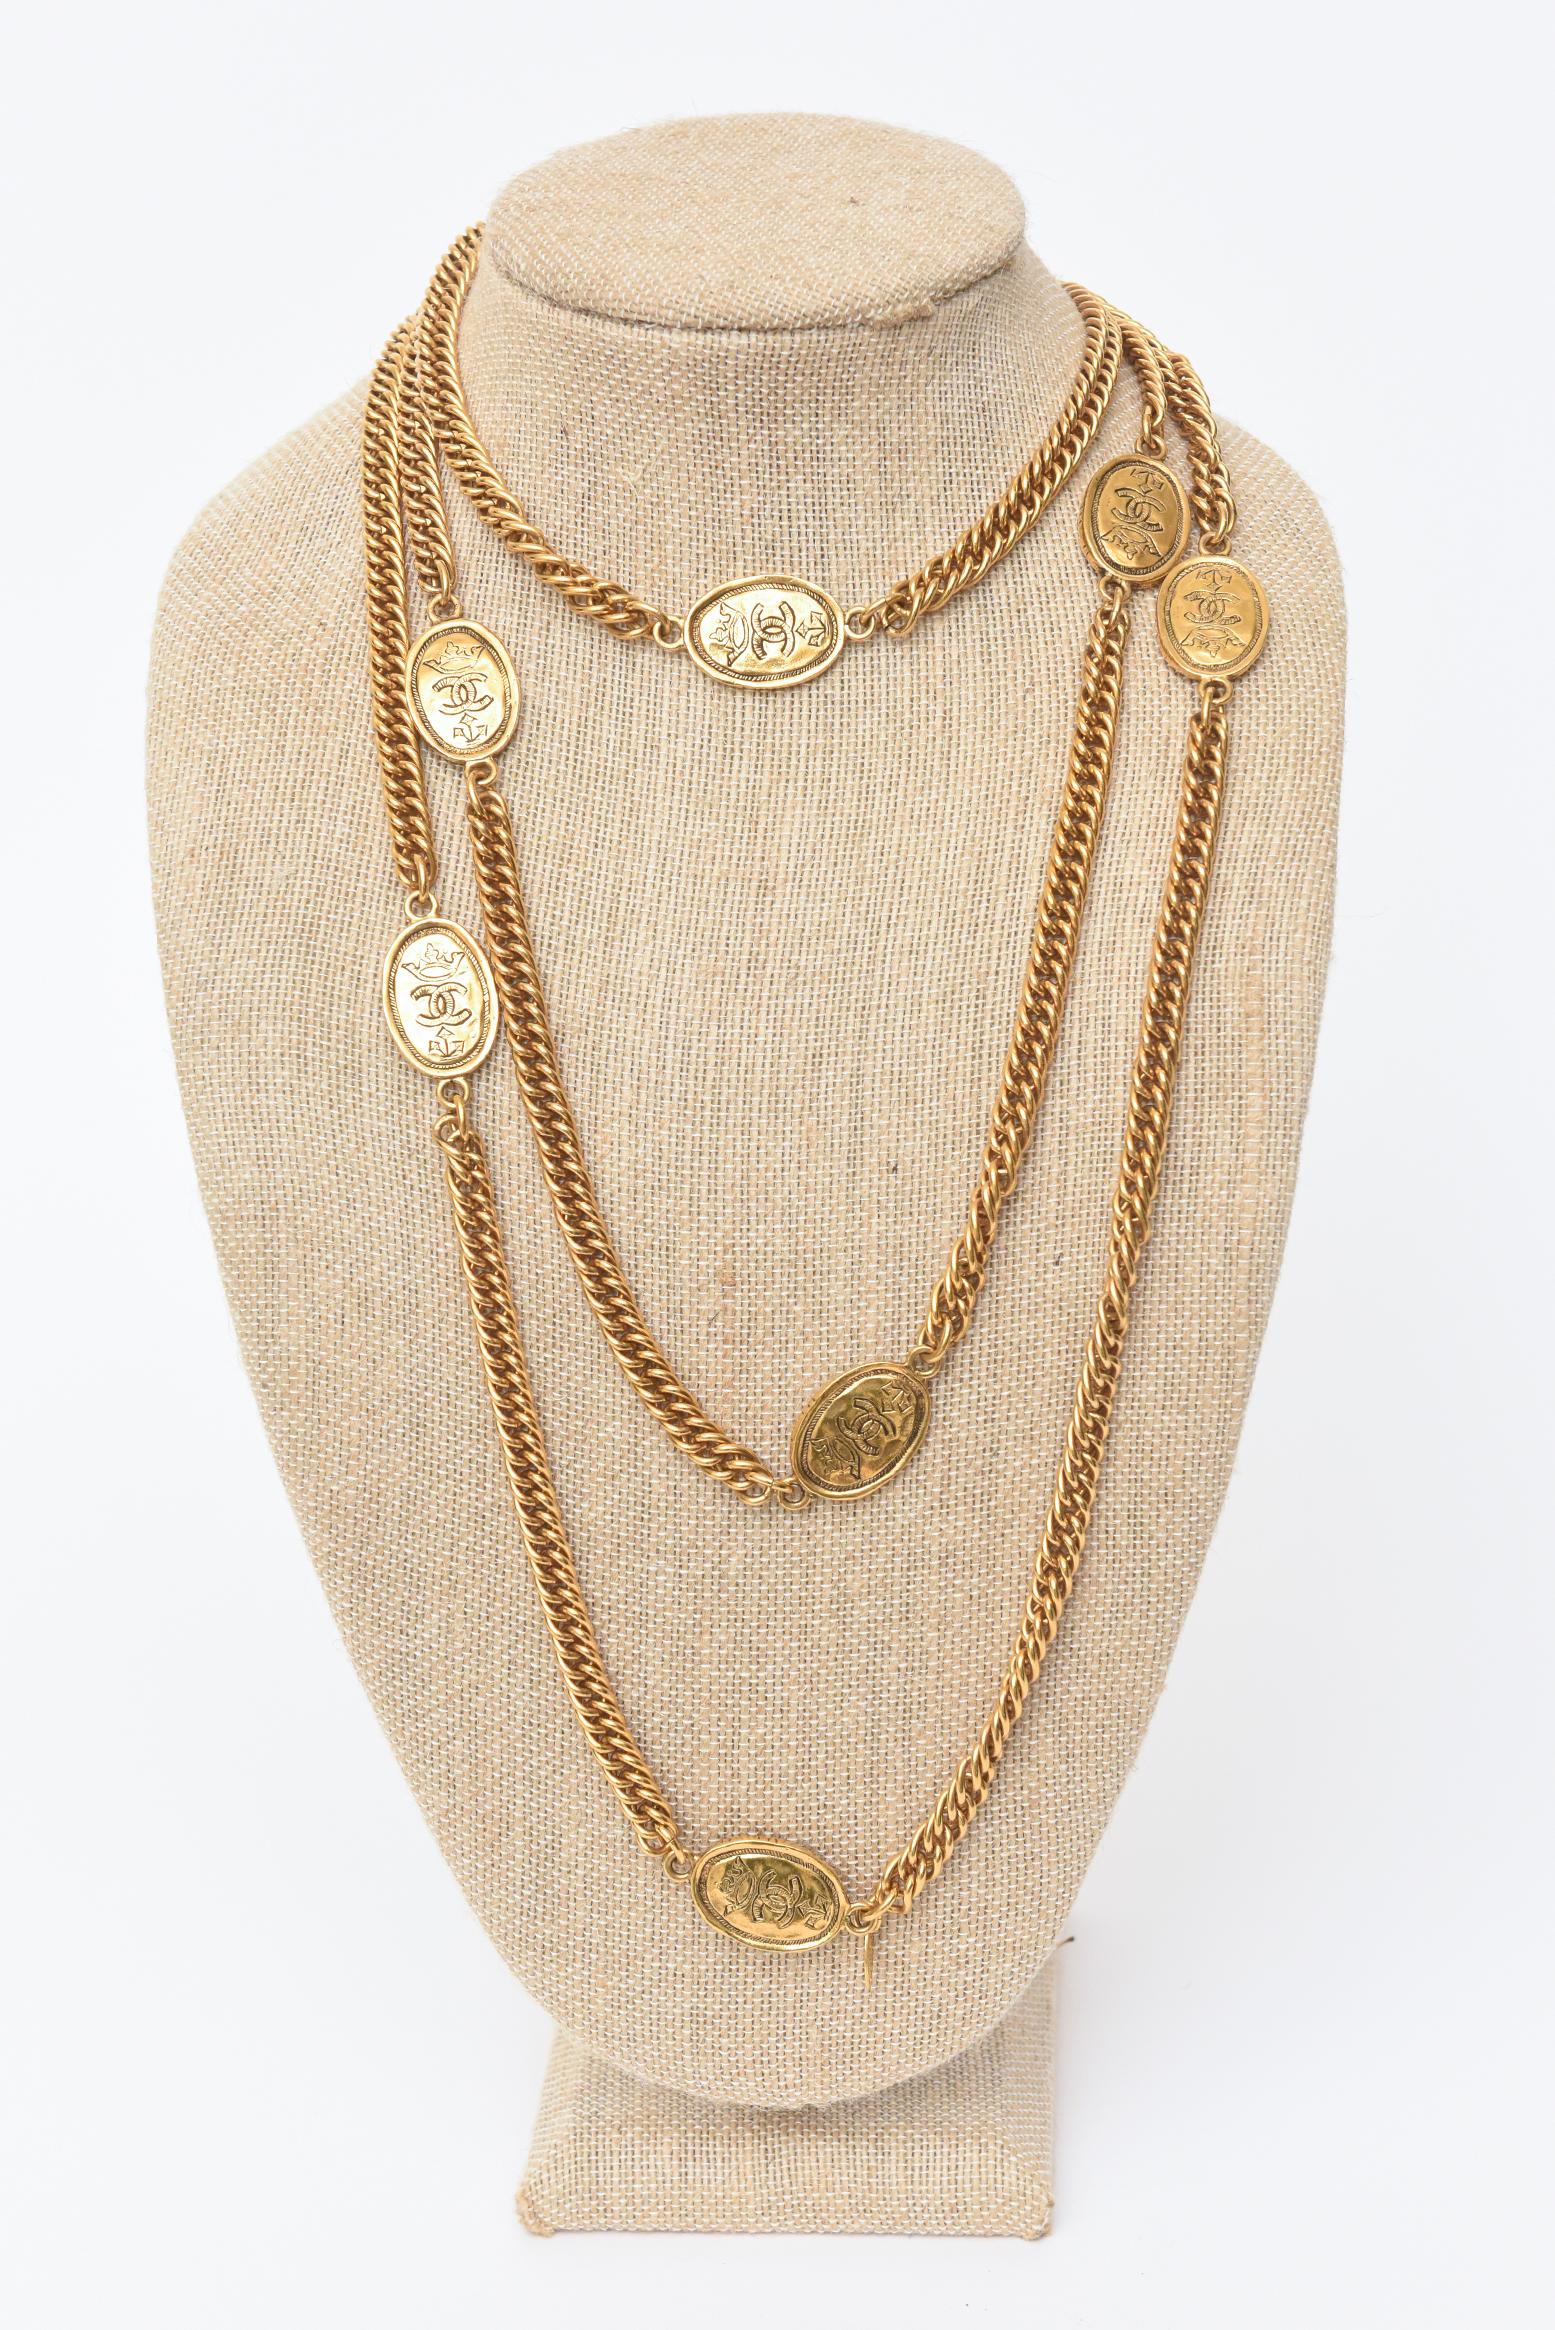 Chanel Vintage Gold Plated Chain Wrap Necklace With Royal Medallions  2